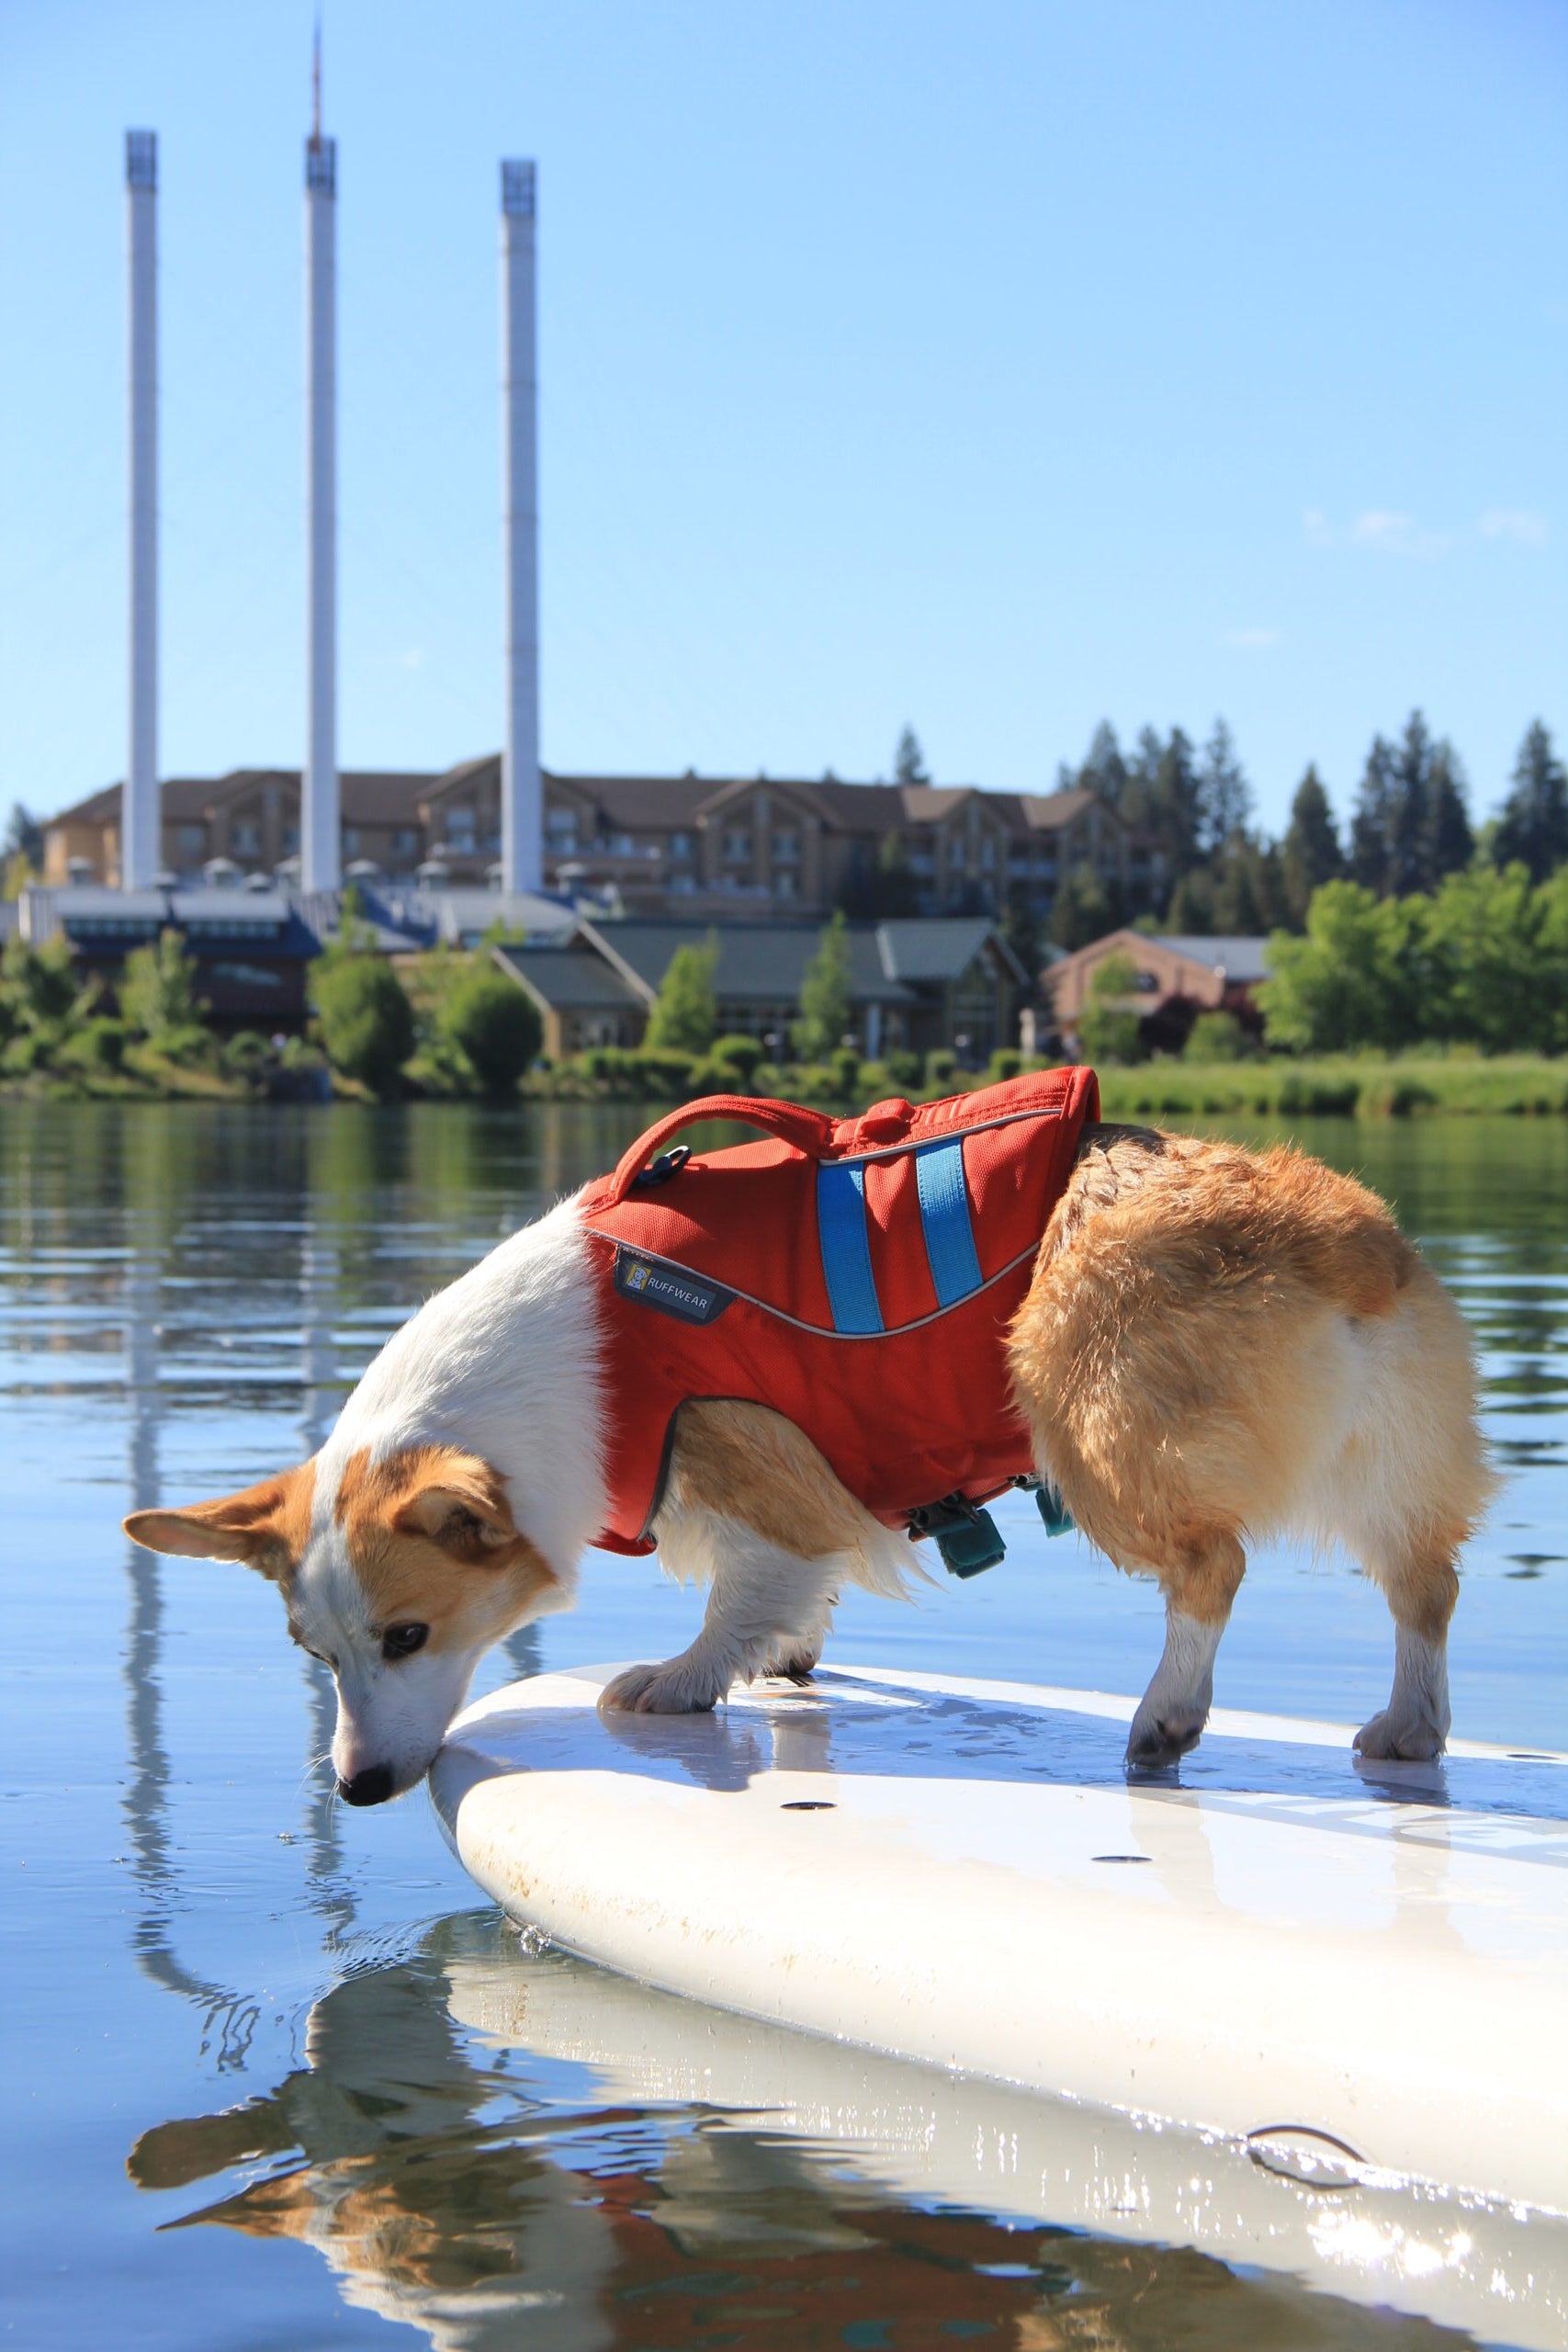 The author's dog stands atop her paddleboard.